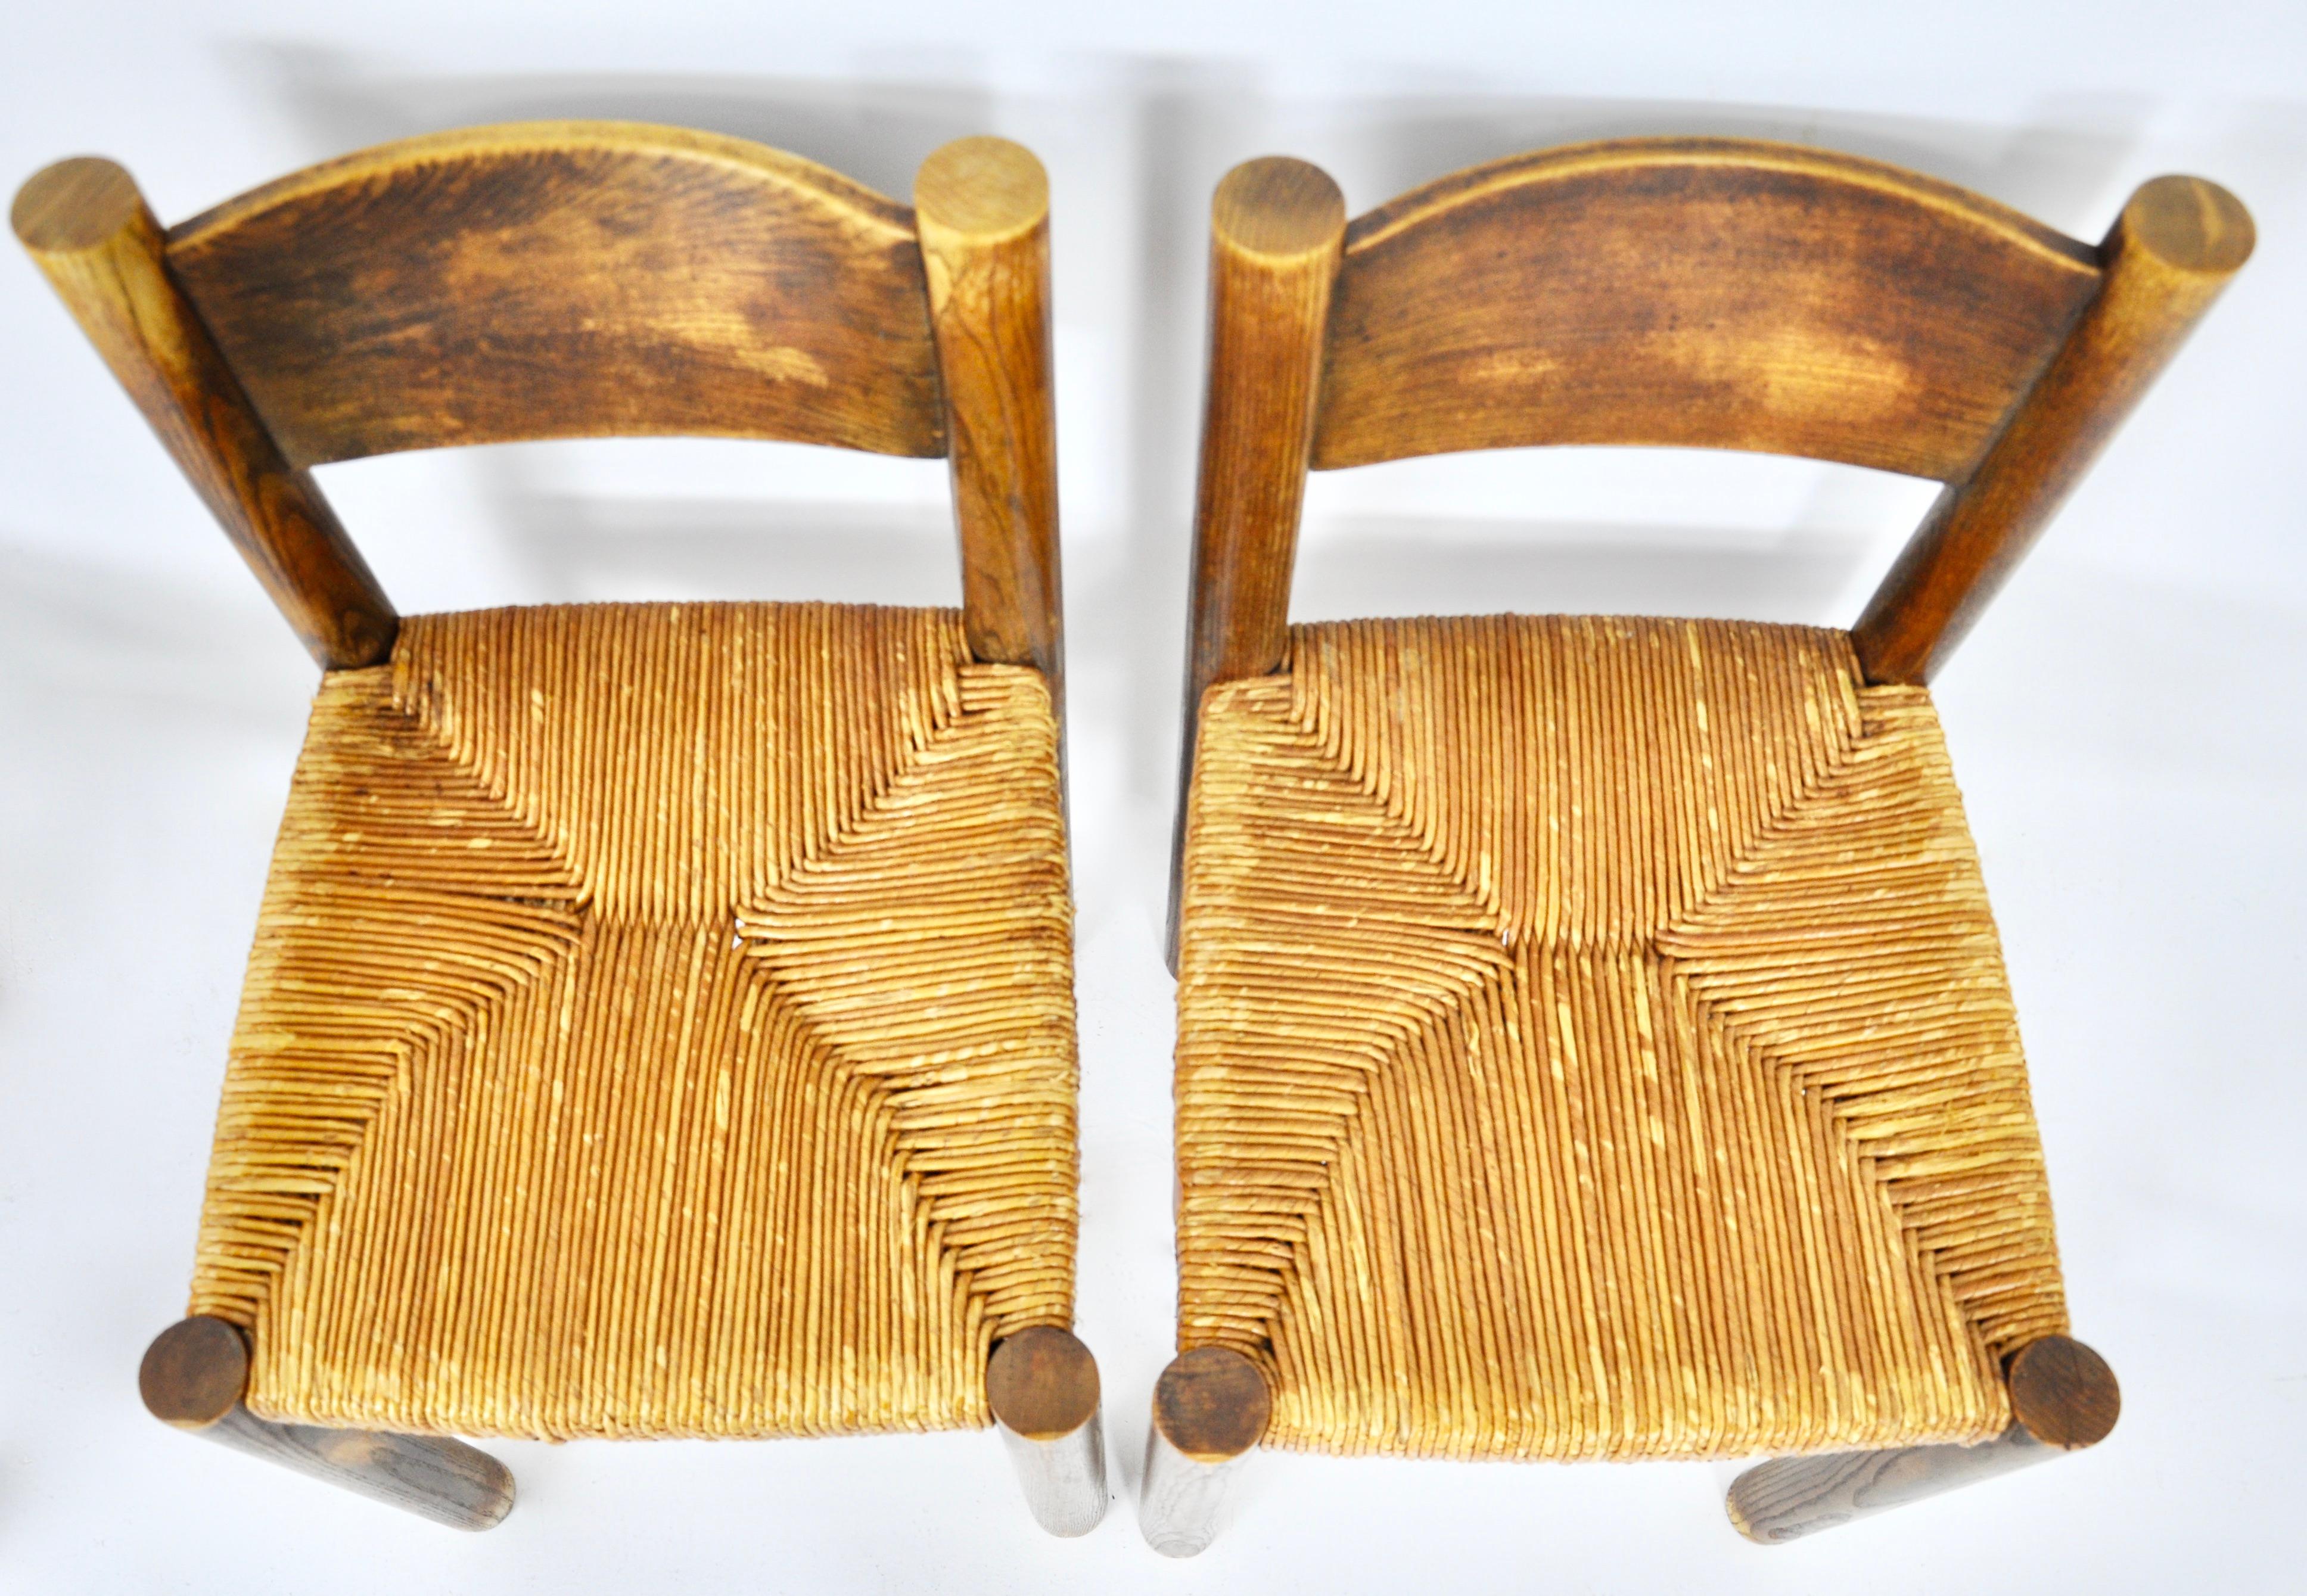 Meribel chairs by Charlotte Perriand for Steph Simon, 1950s, set of 4 For Sale 4